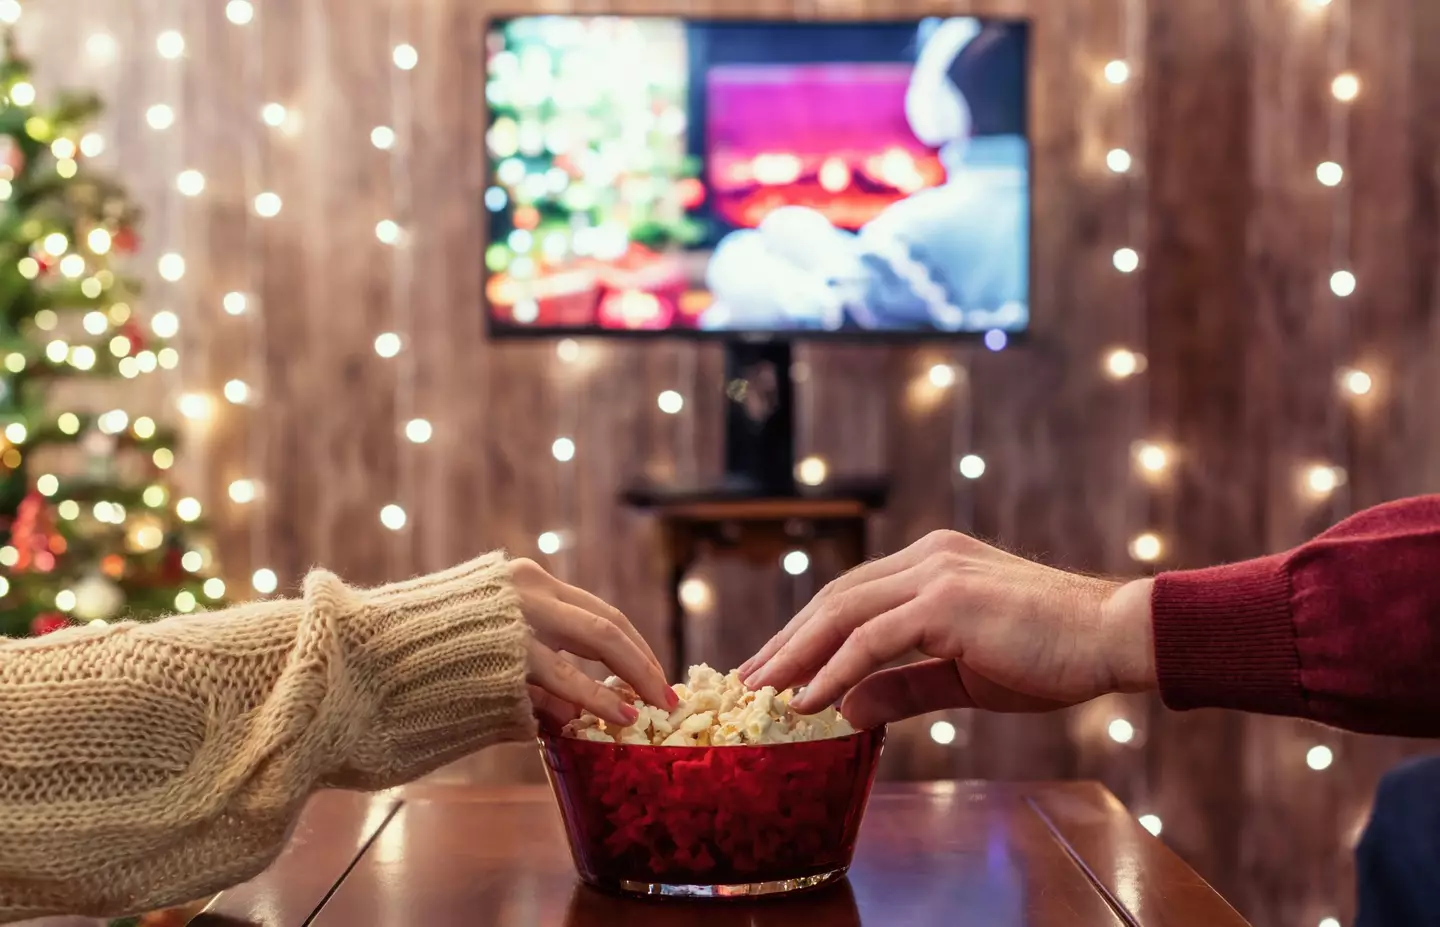 One lucky candidate will get paid to watch 25 Christmas films in 25 days.